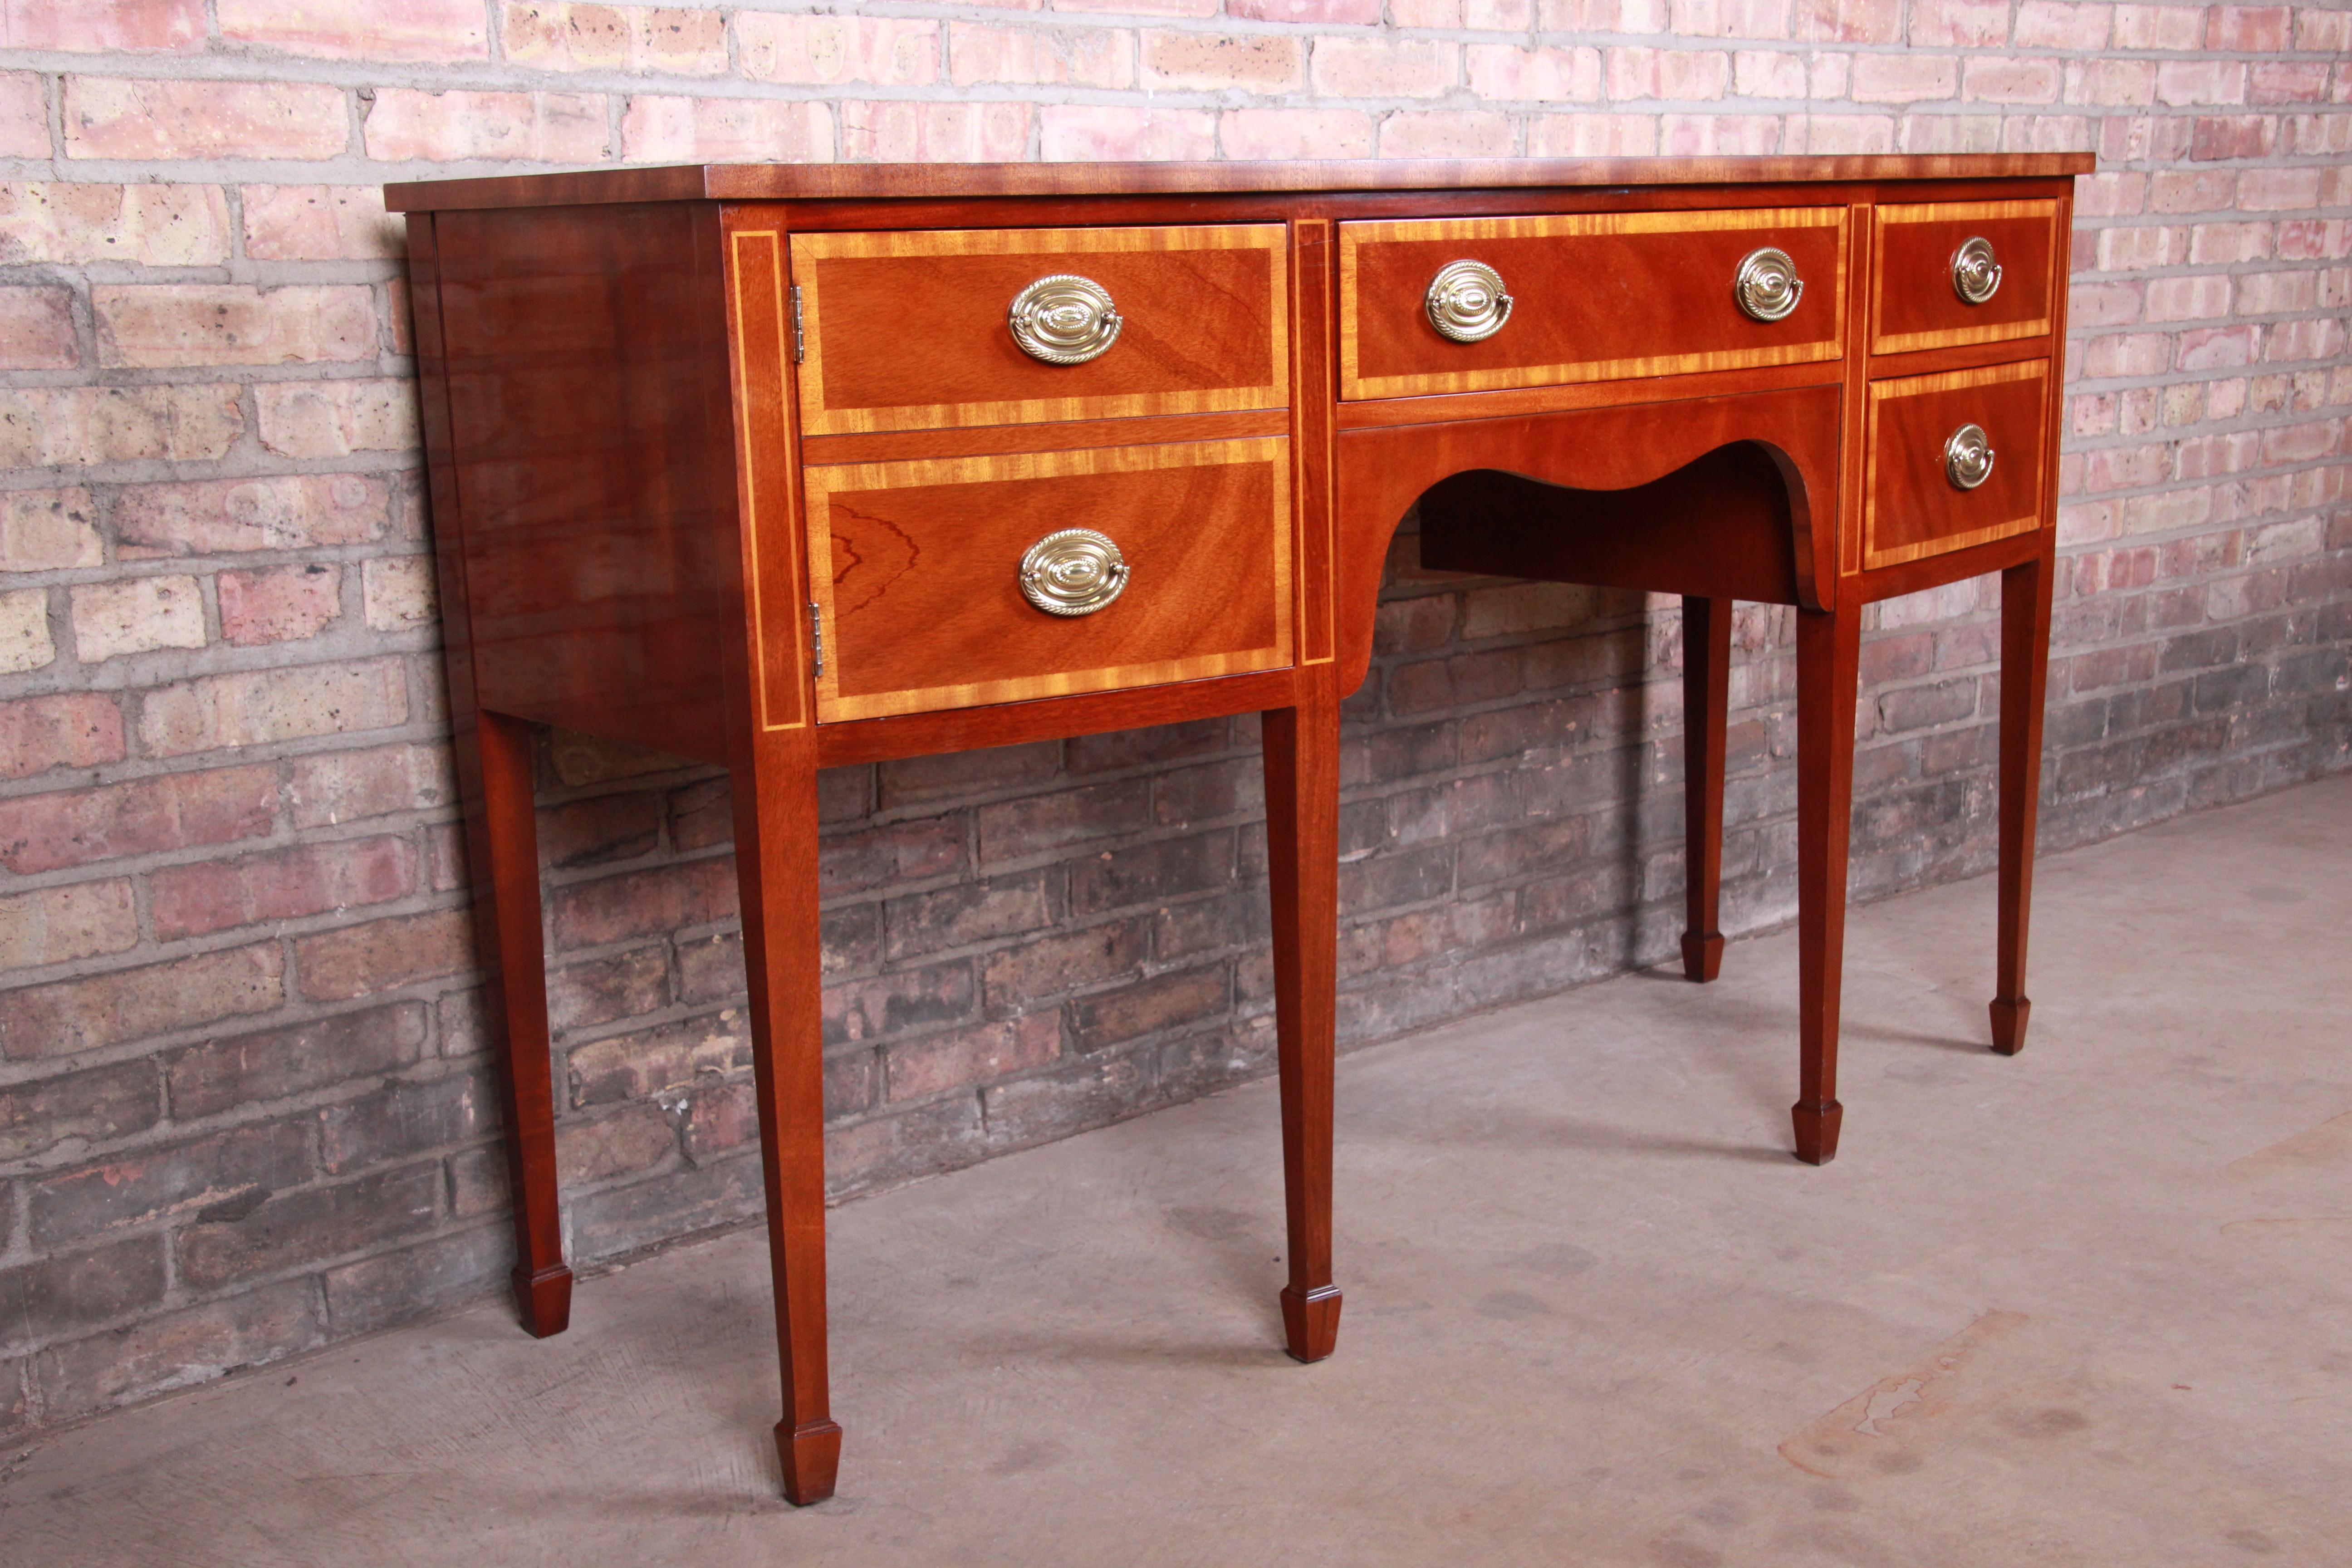 20th Century Kindel Furniture Georgian Bow Front Banded Mahogany Sideboard Credenza